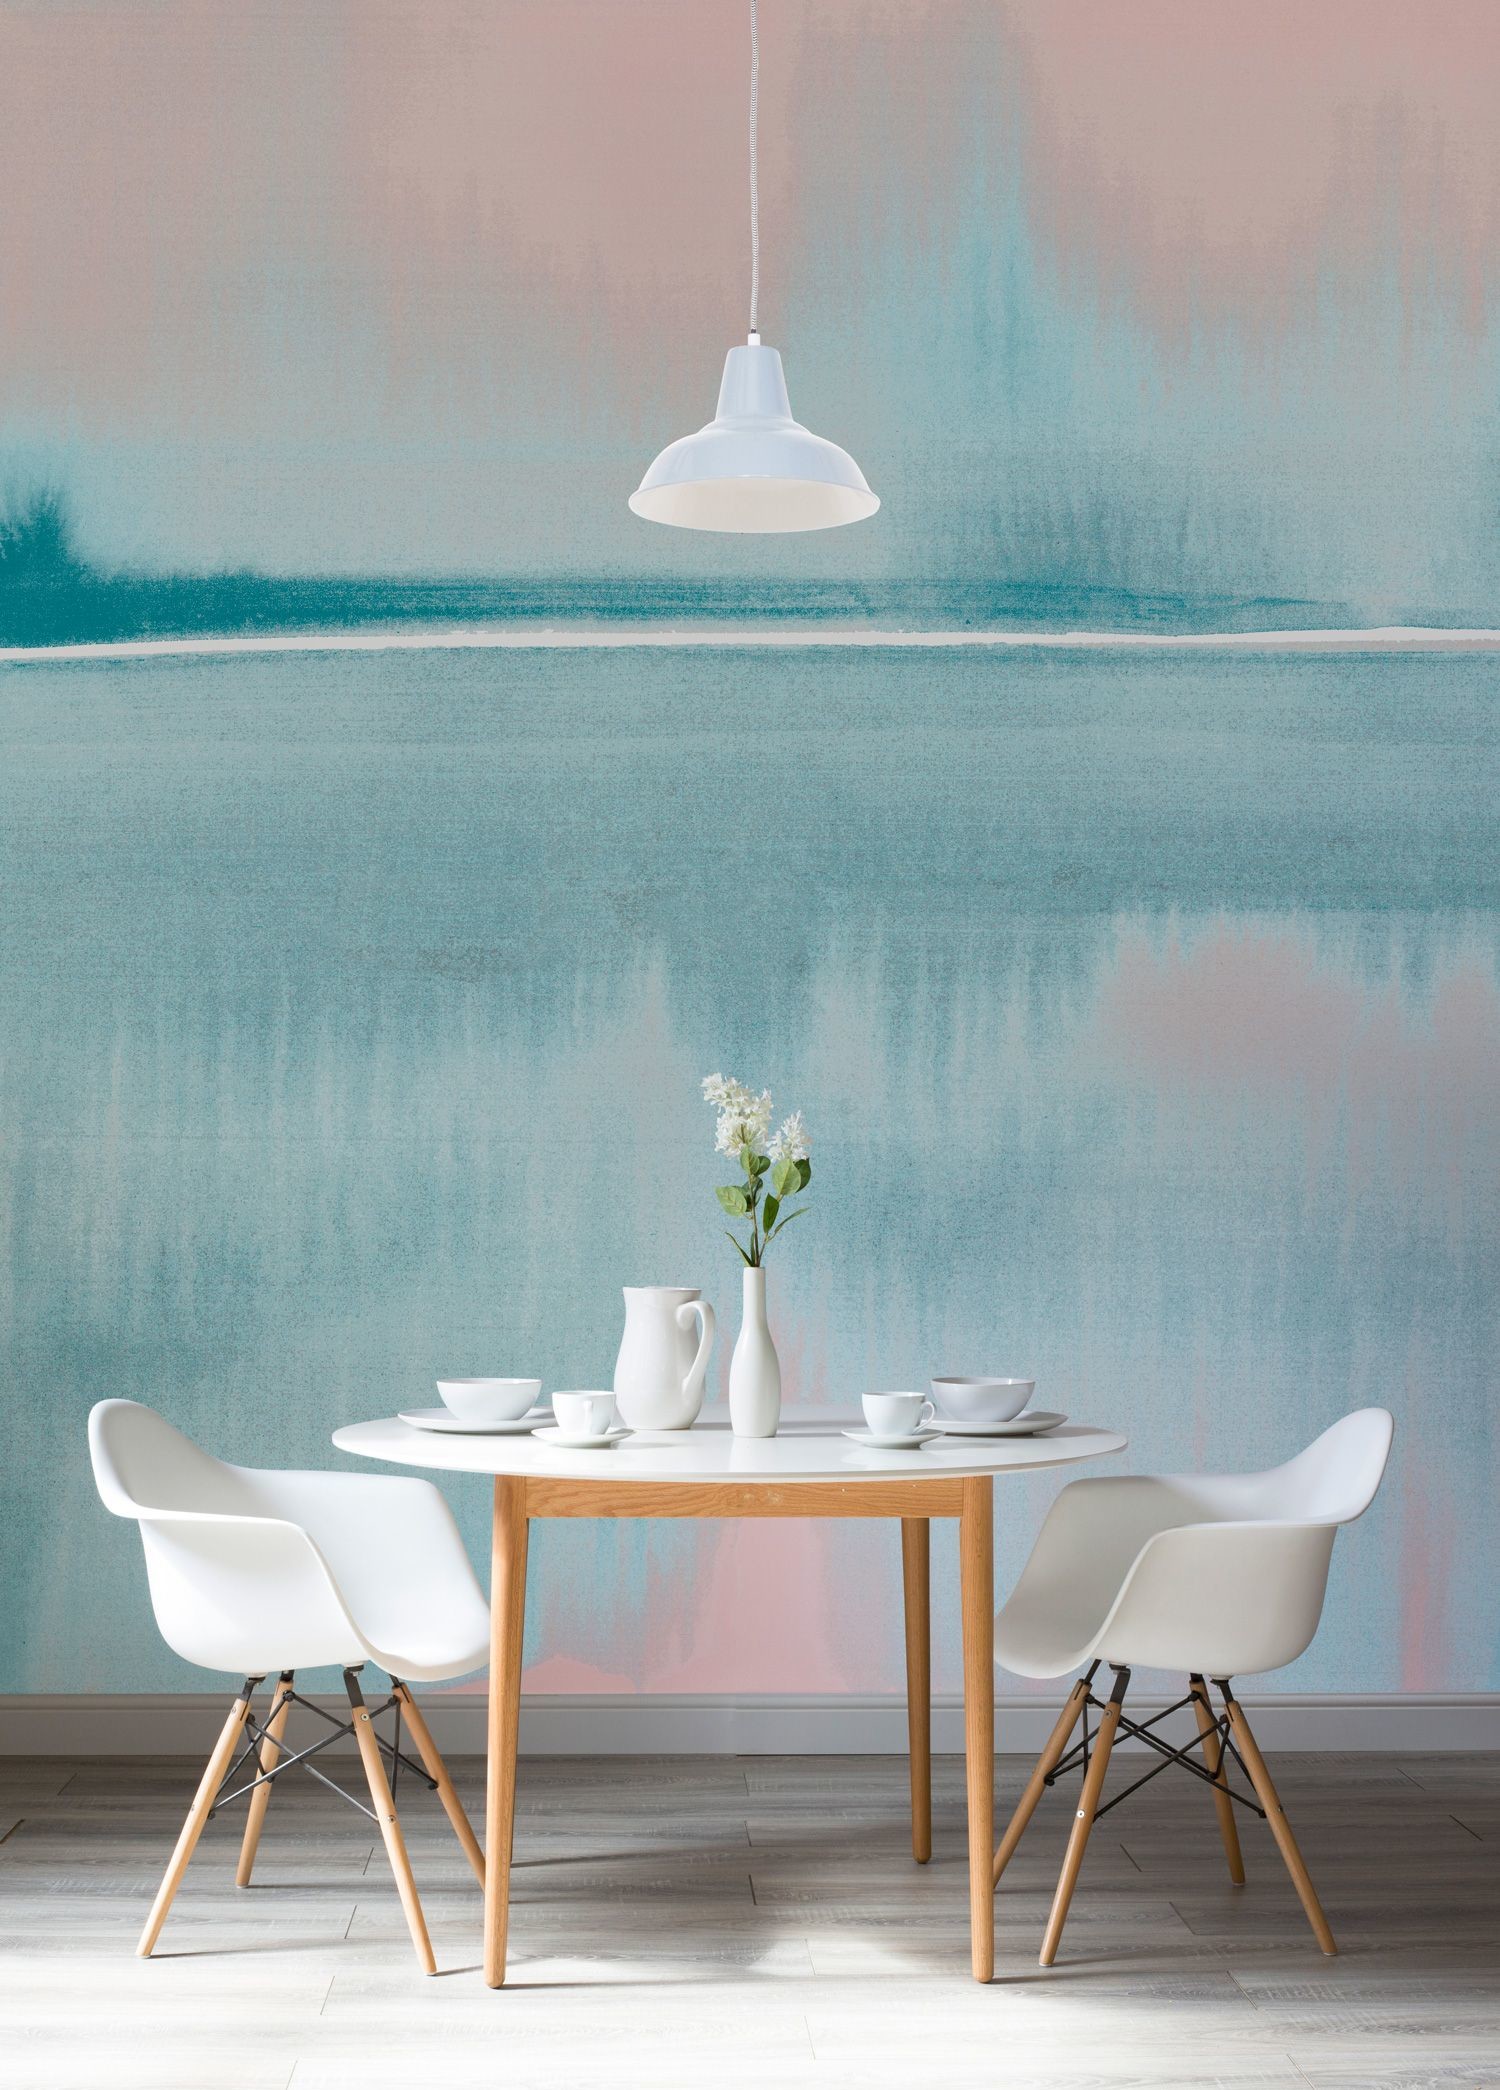 1500x2090 Lose yourself in this dreamy watercolour wallpaper mural. Depicting an  abstract view of a still lake, this is a completely unique landscape that  features ...